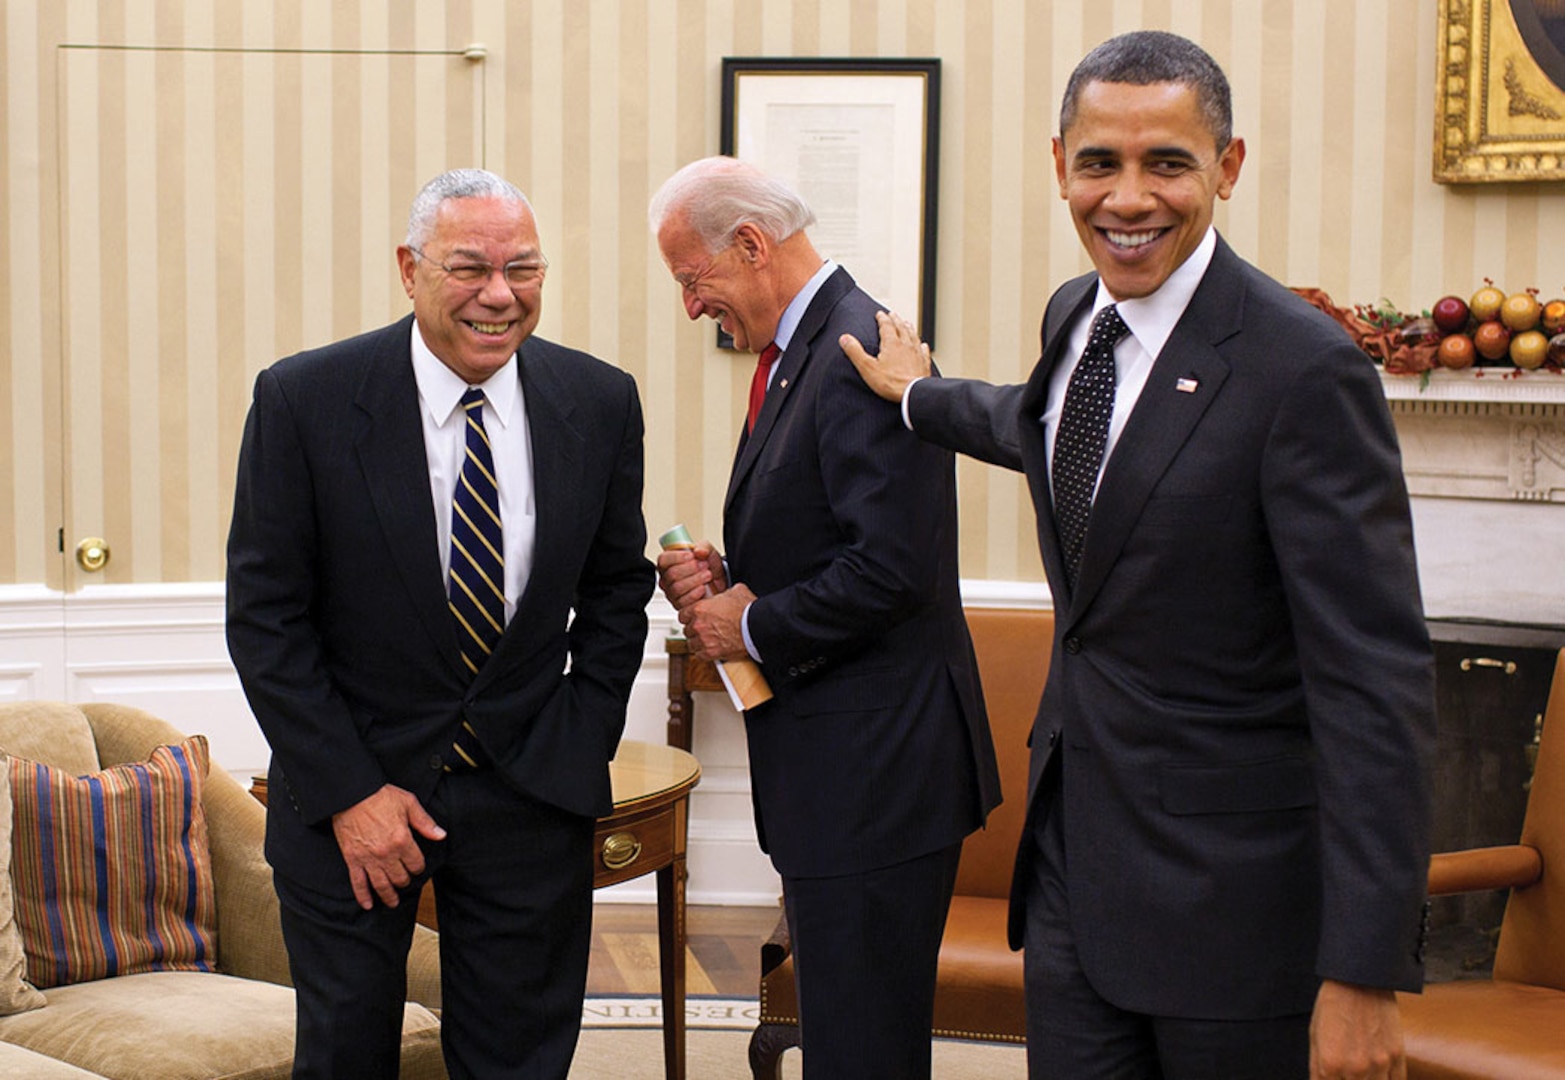 President Barack Obama jokes with Vice President Joe Biden and former Secretary of State Powell following their meeting in Oval Office, December 1, 2010 (The White House/Pete Souza)